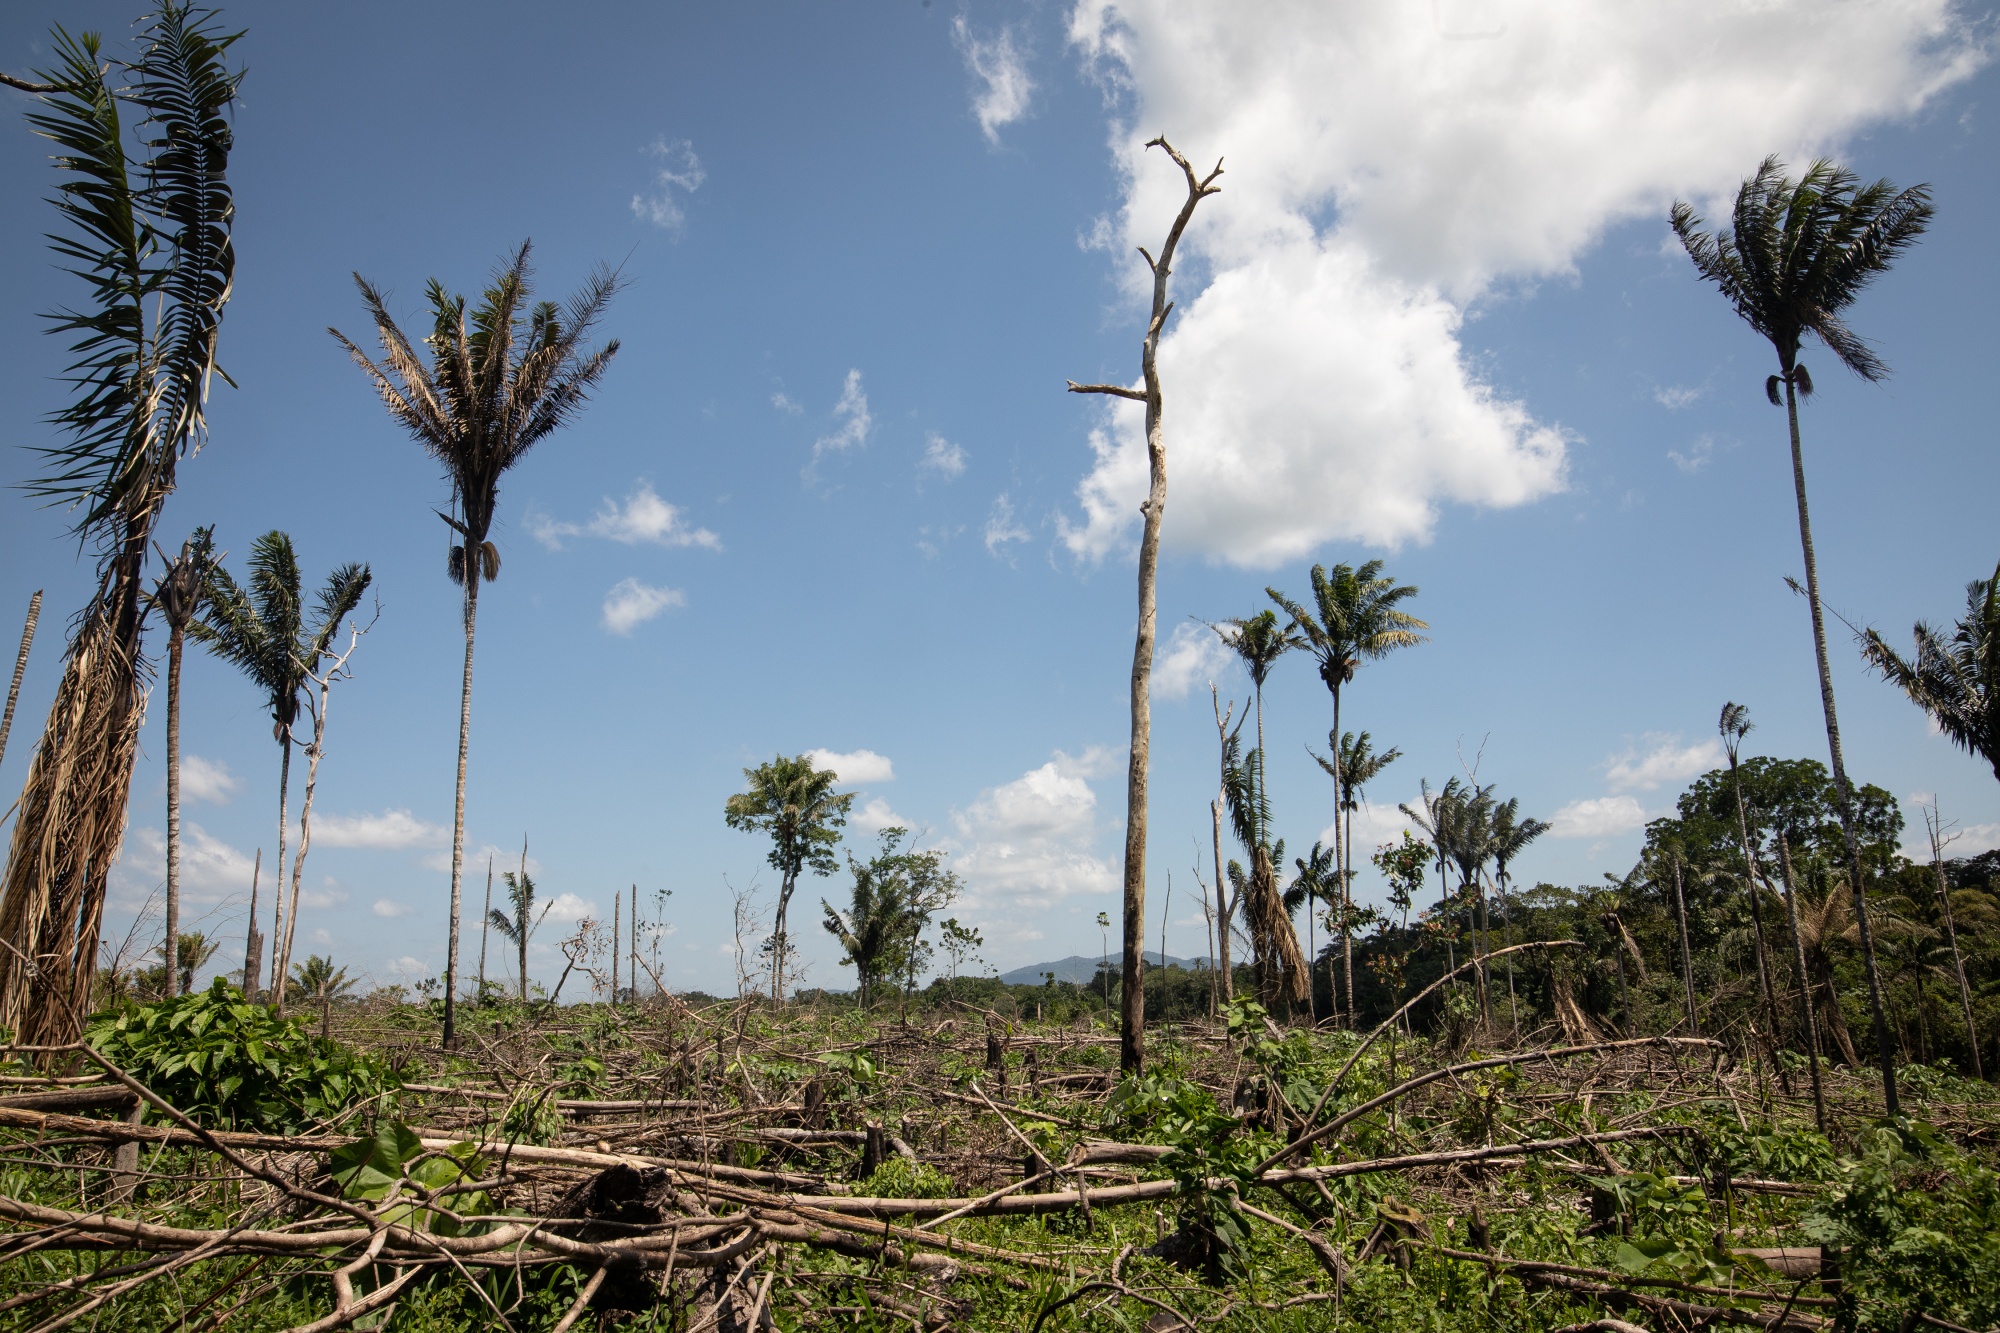 Deforestation in Brazil could significantly increase local surface